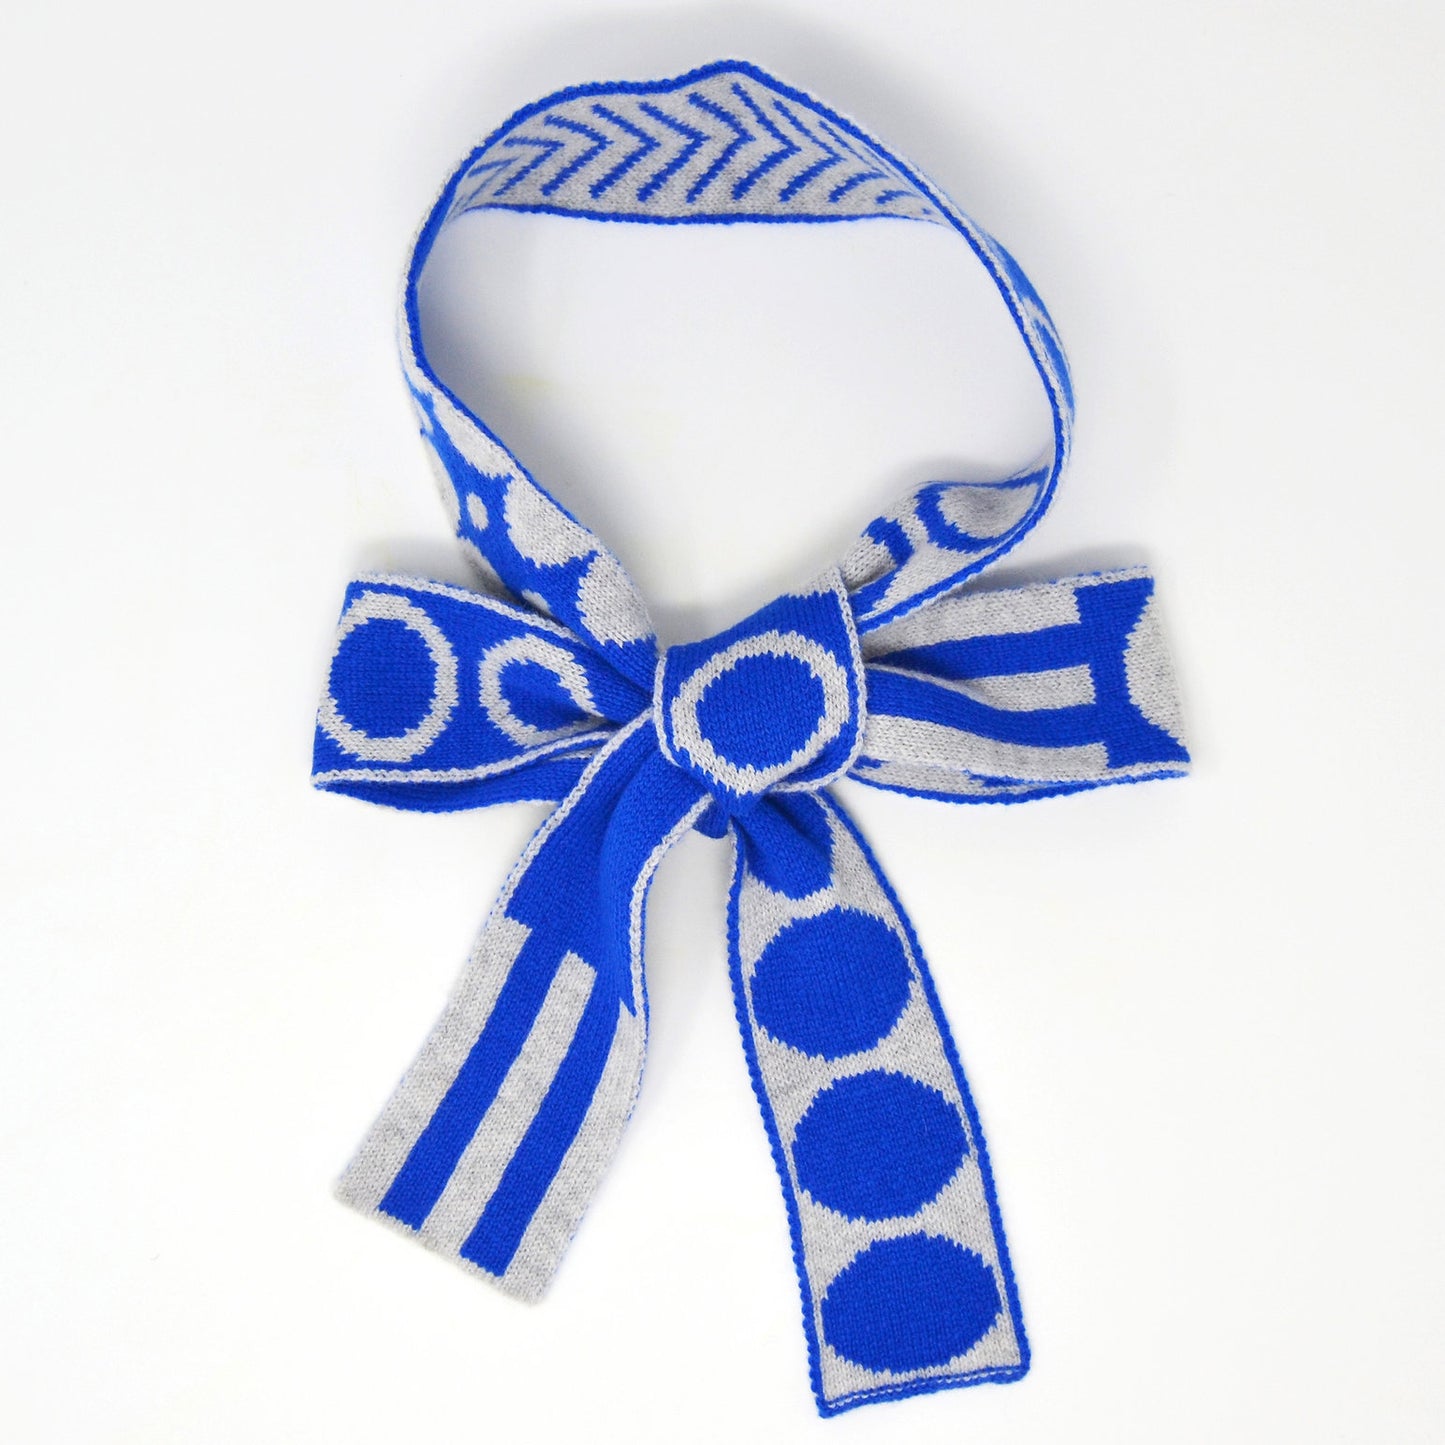 Mixed Shapes Skinny Scarf - Blue